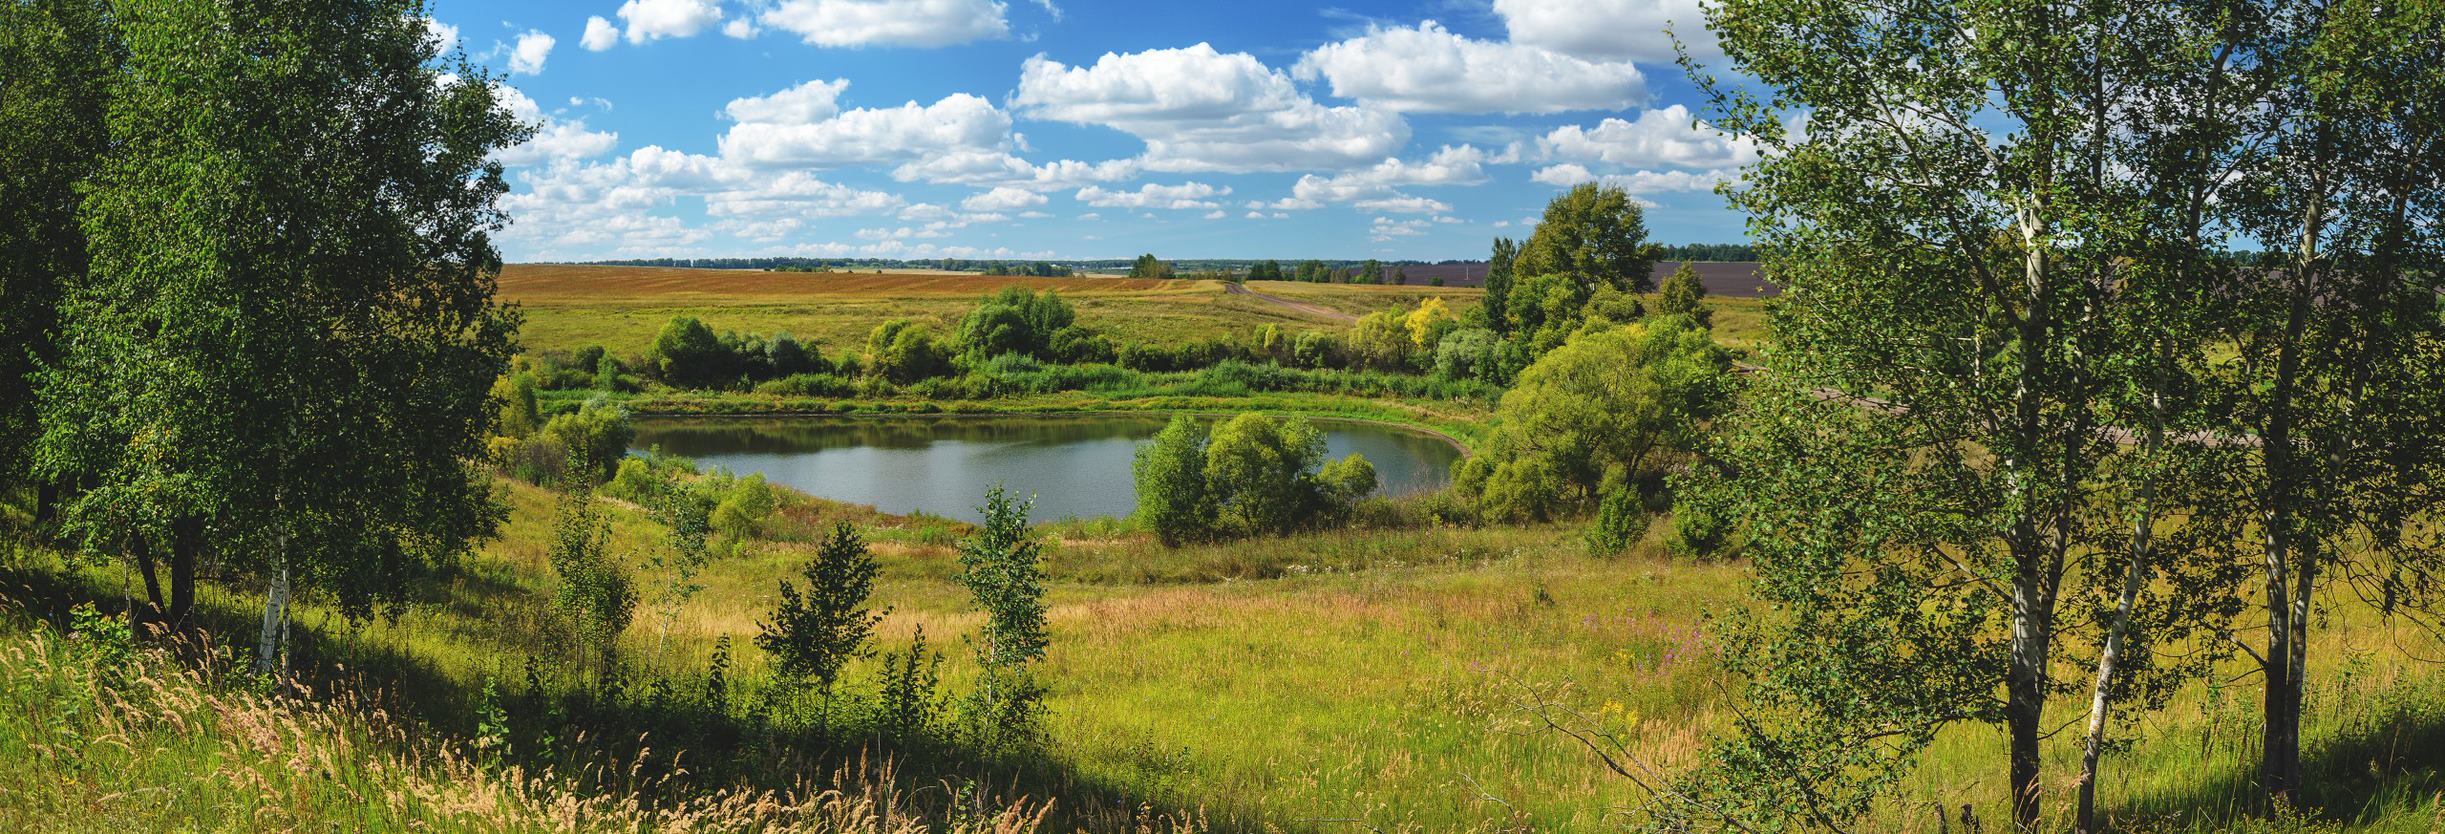 A scenic view of a rural field with trees, and a tranquil pond. The serene scene is set under a clear blue sky with scattered fluffy clouds.